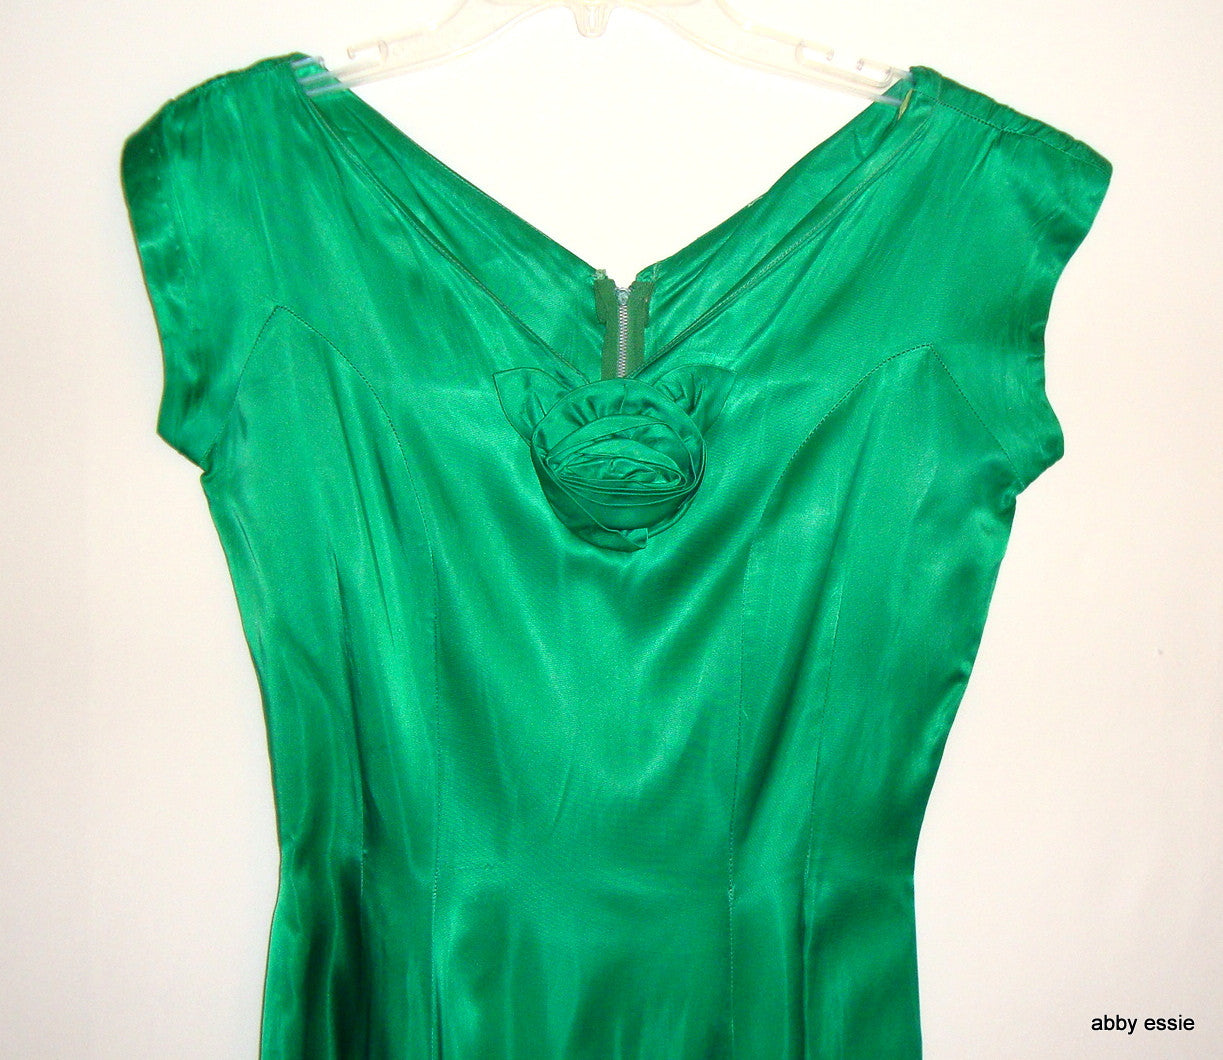 Green Silk 1950s Vintage Party Dress Rosettes Abby Essie